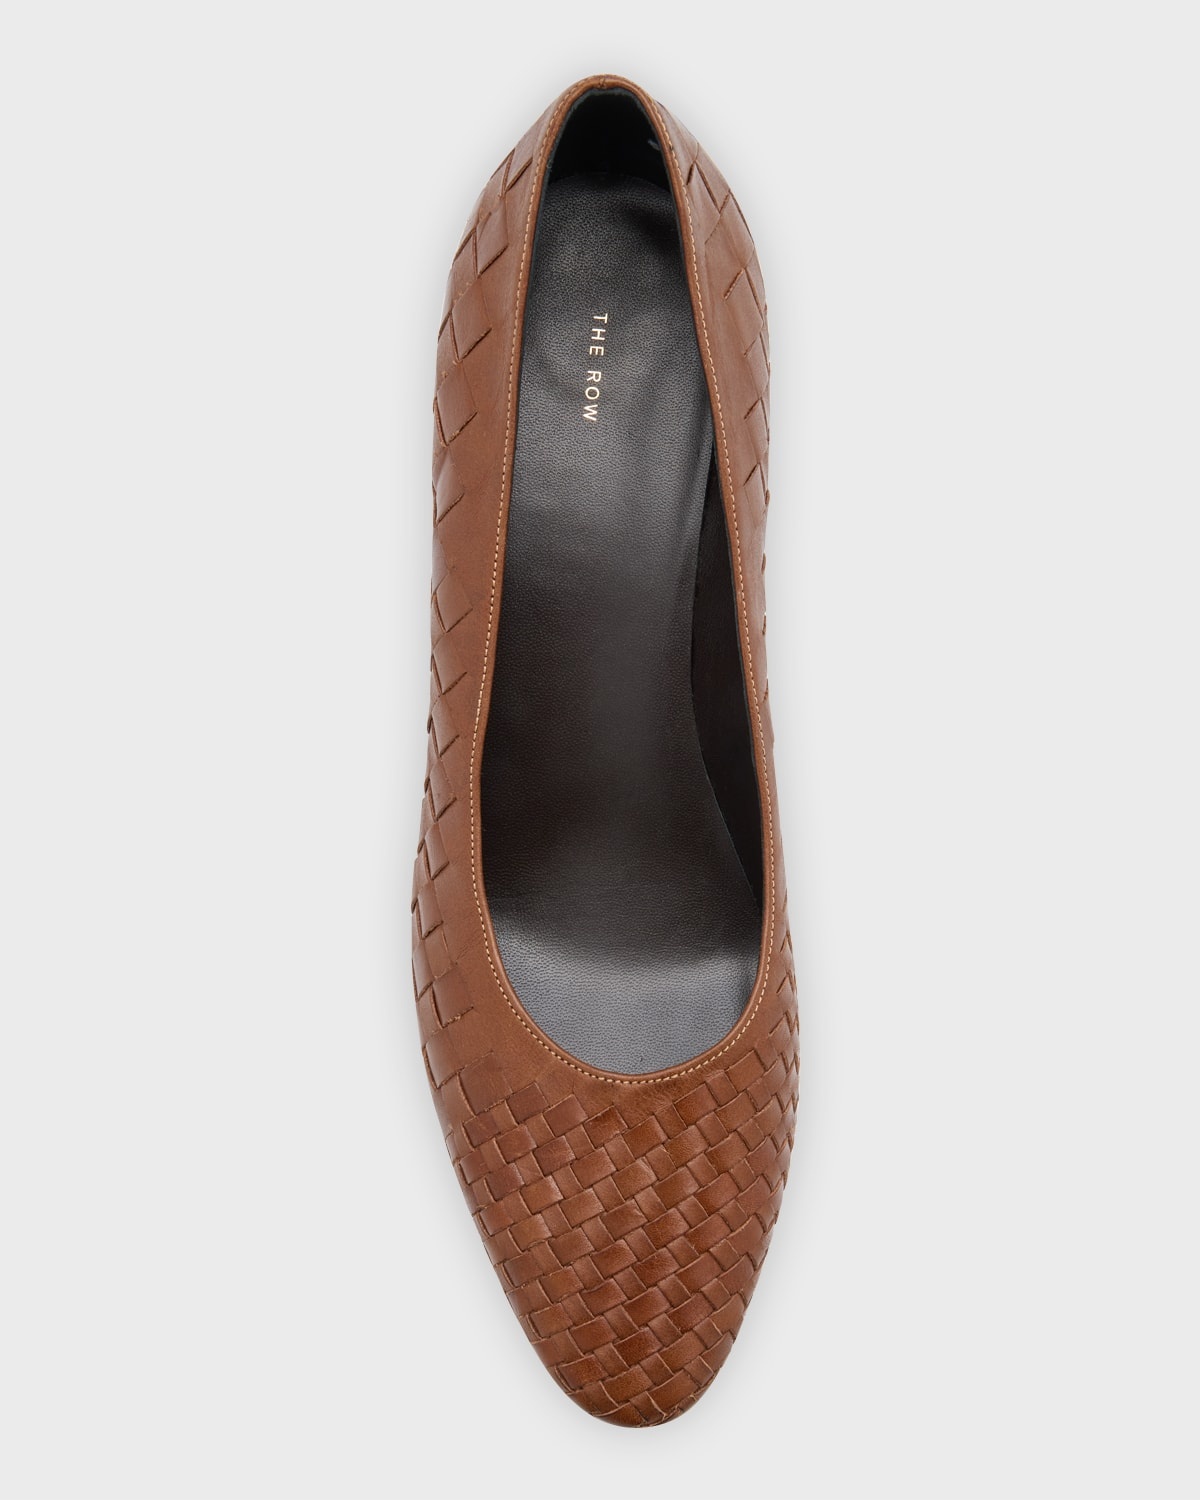 Charlotte Woven Leather Pumps - 4